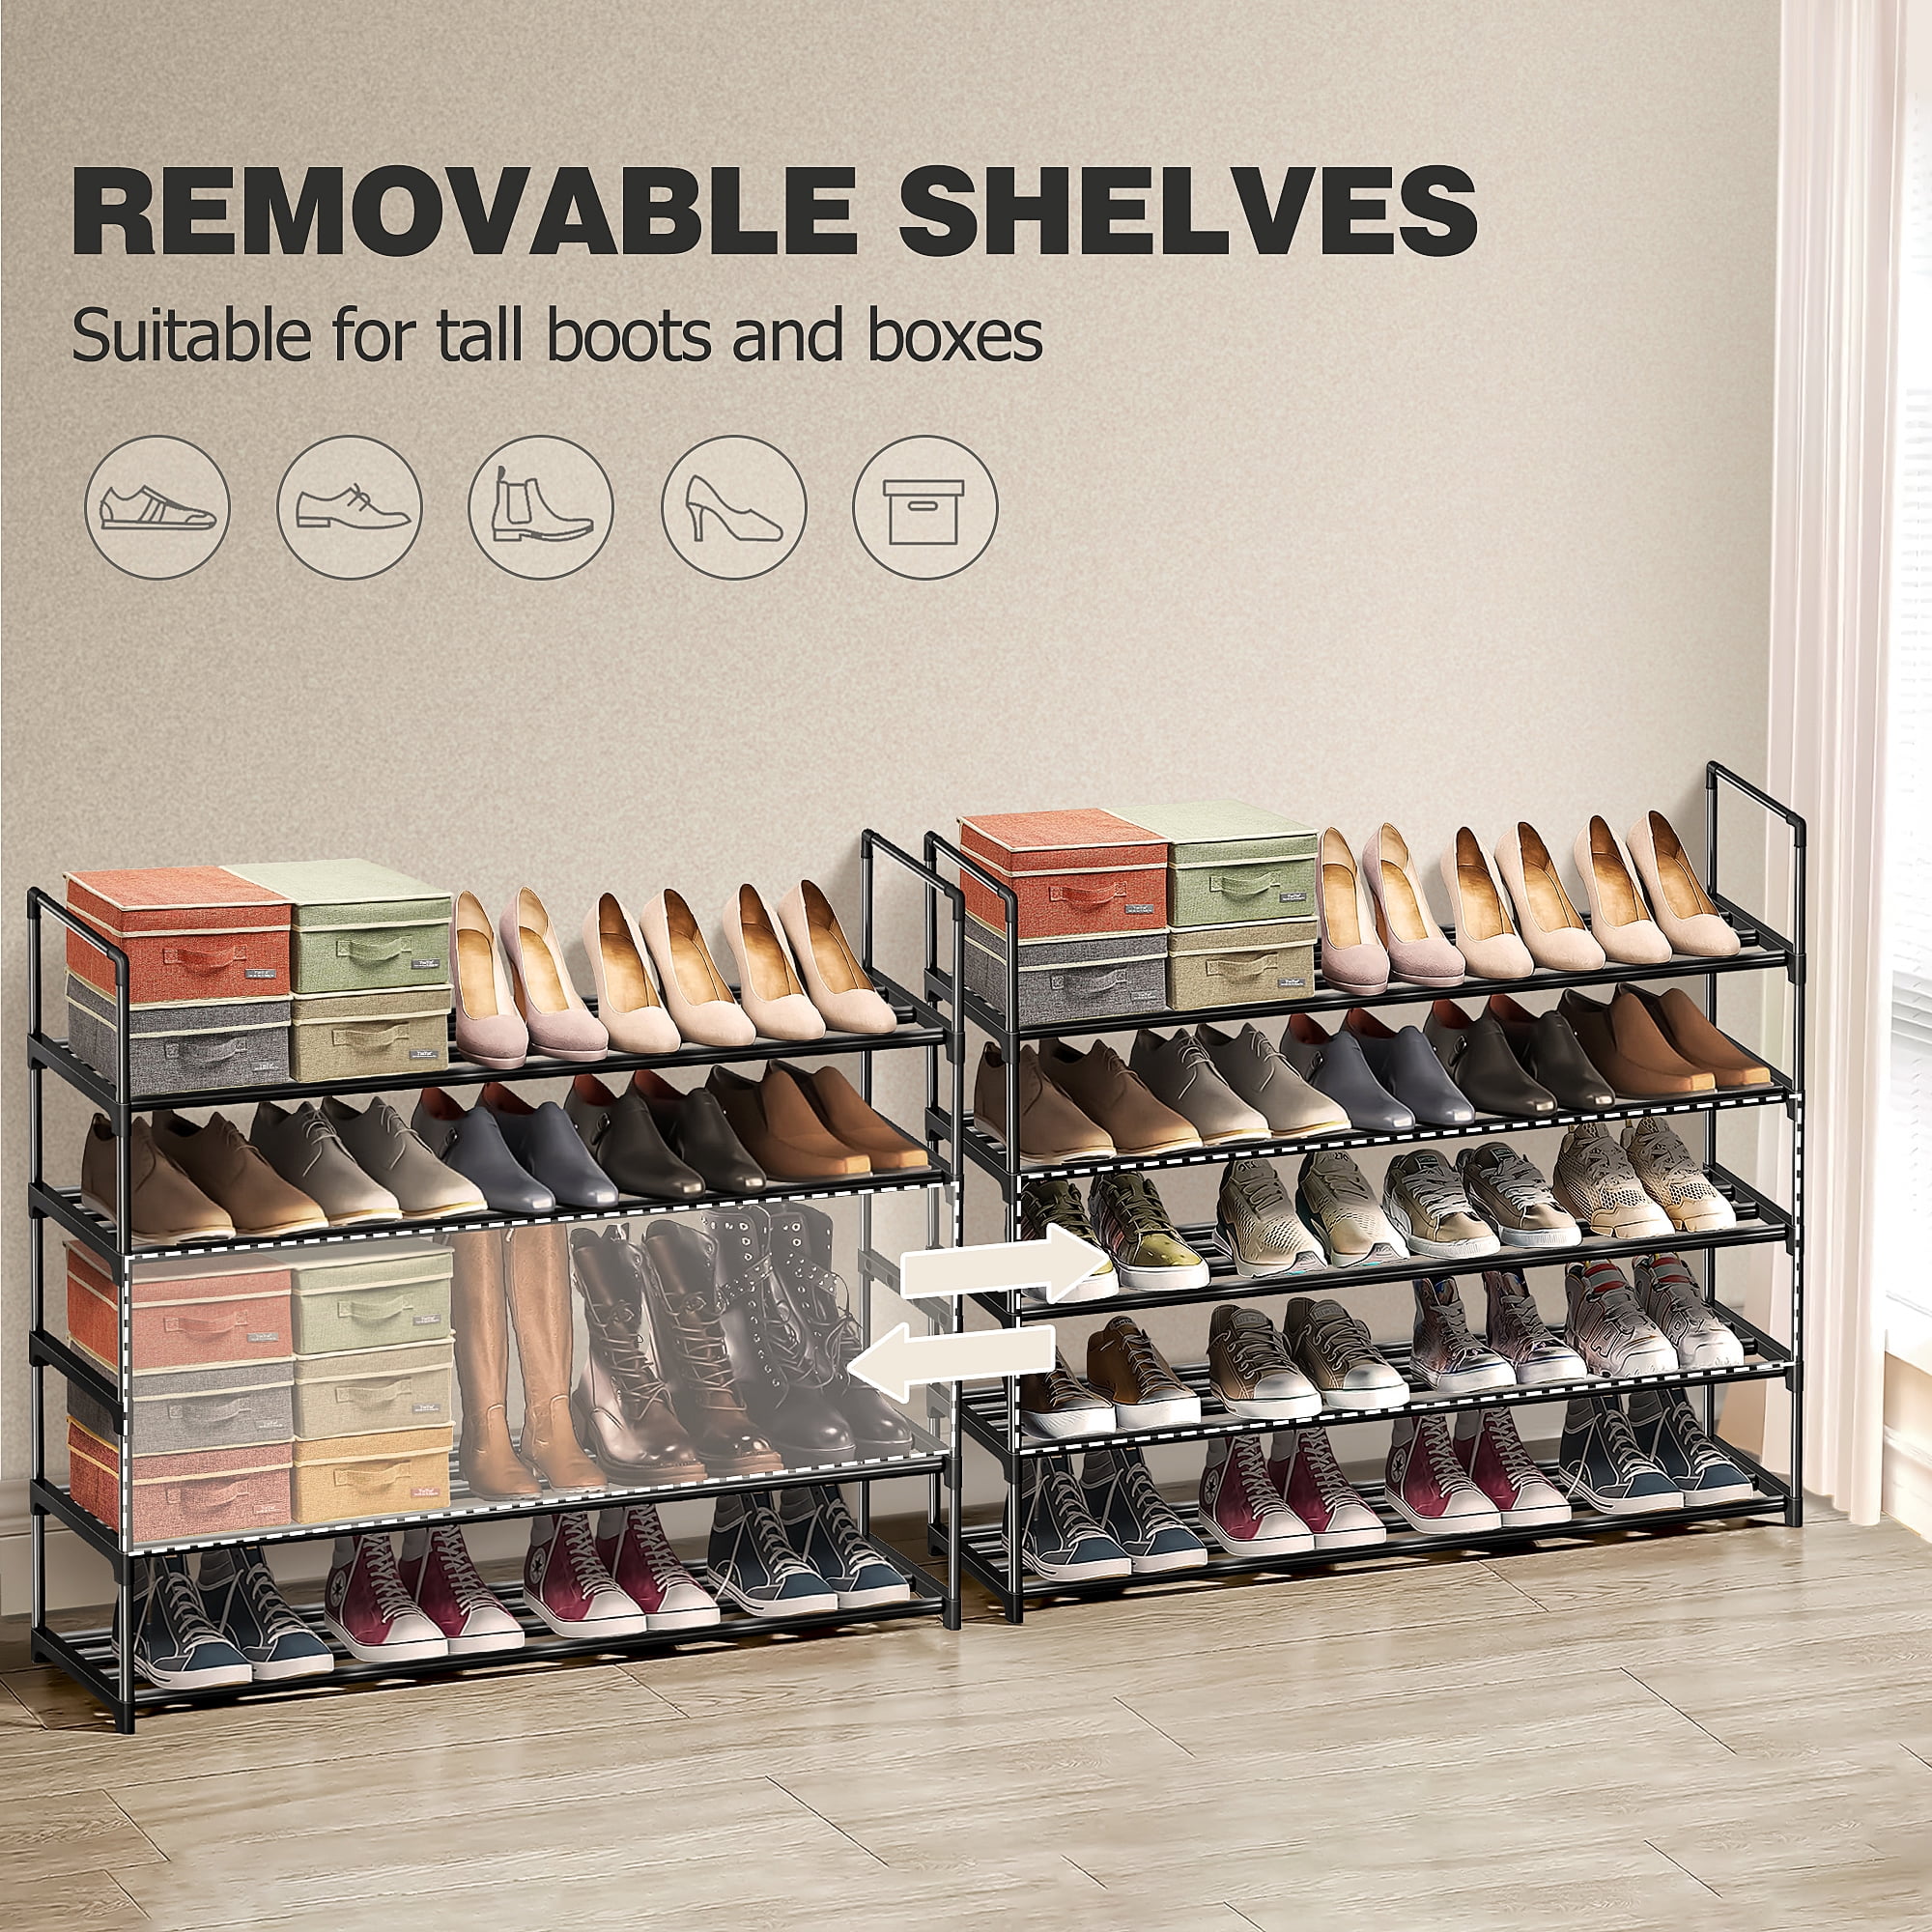 Somerset Home 5-Tier Shoe Rack 30 Pair Storage Organizer for Shoes, Size: 5 - Tier